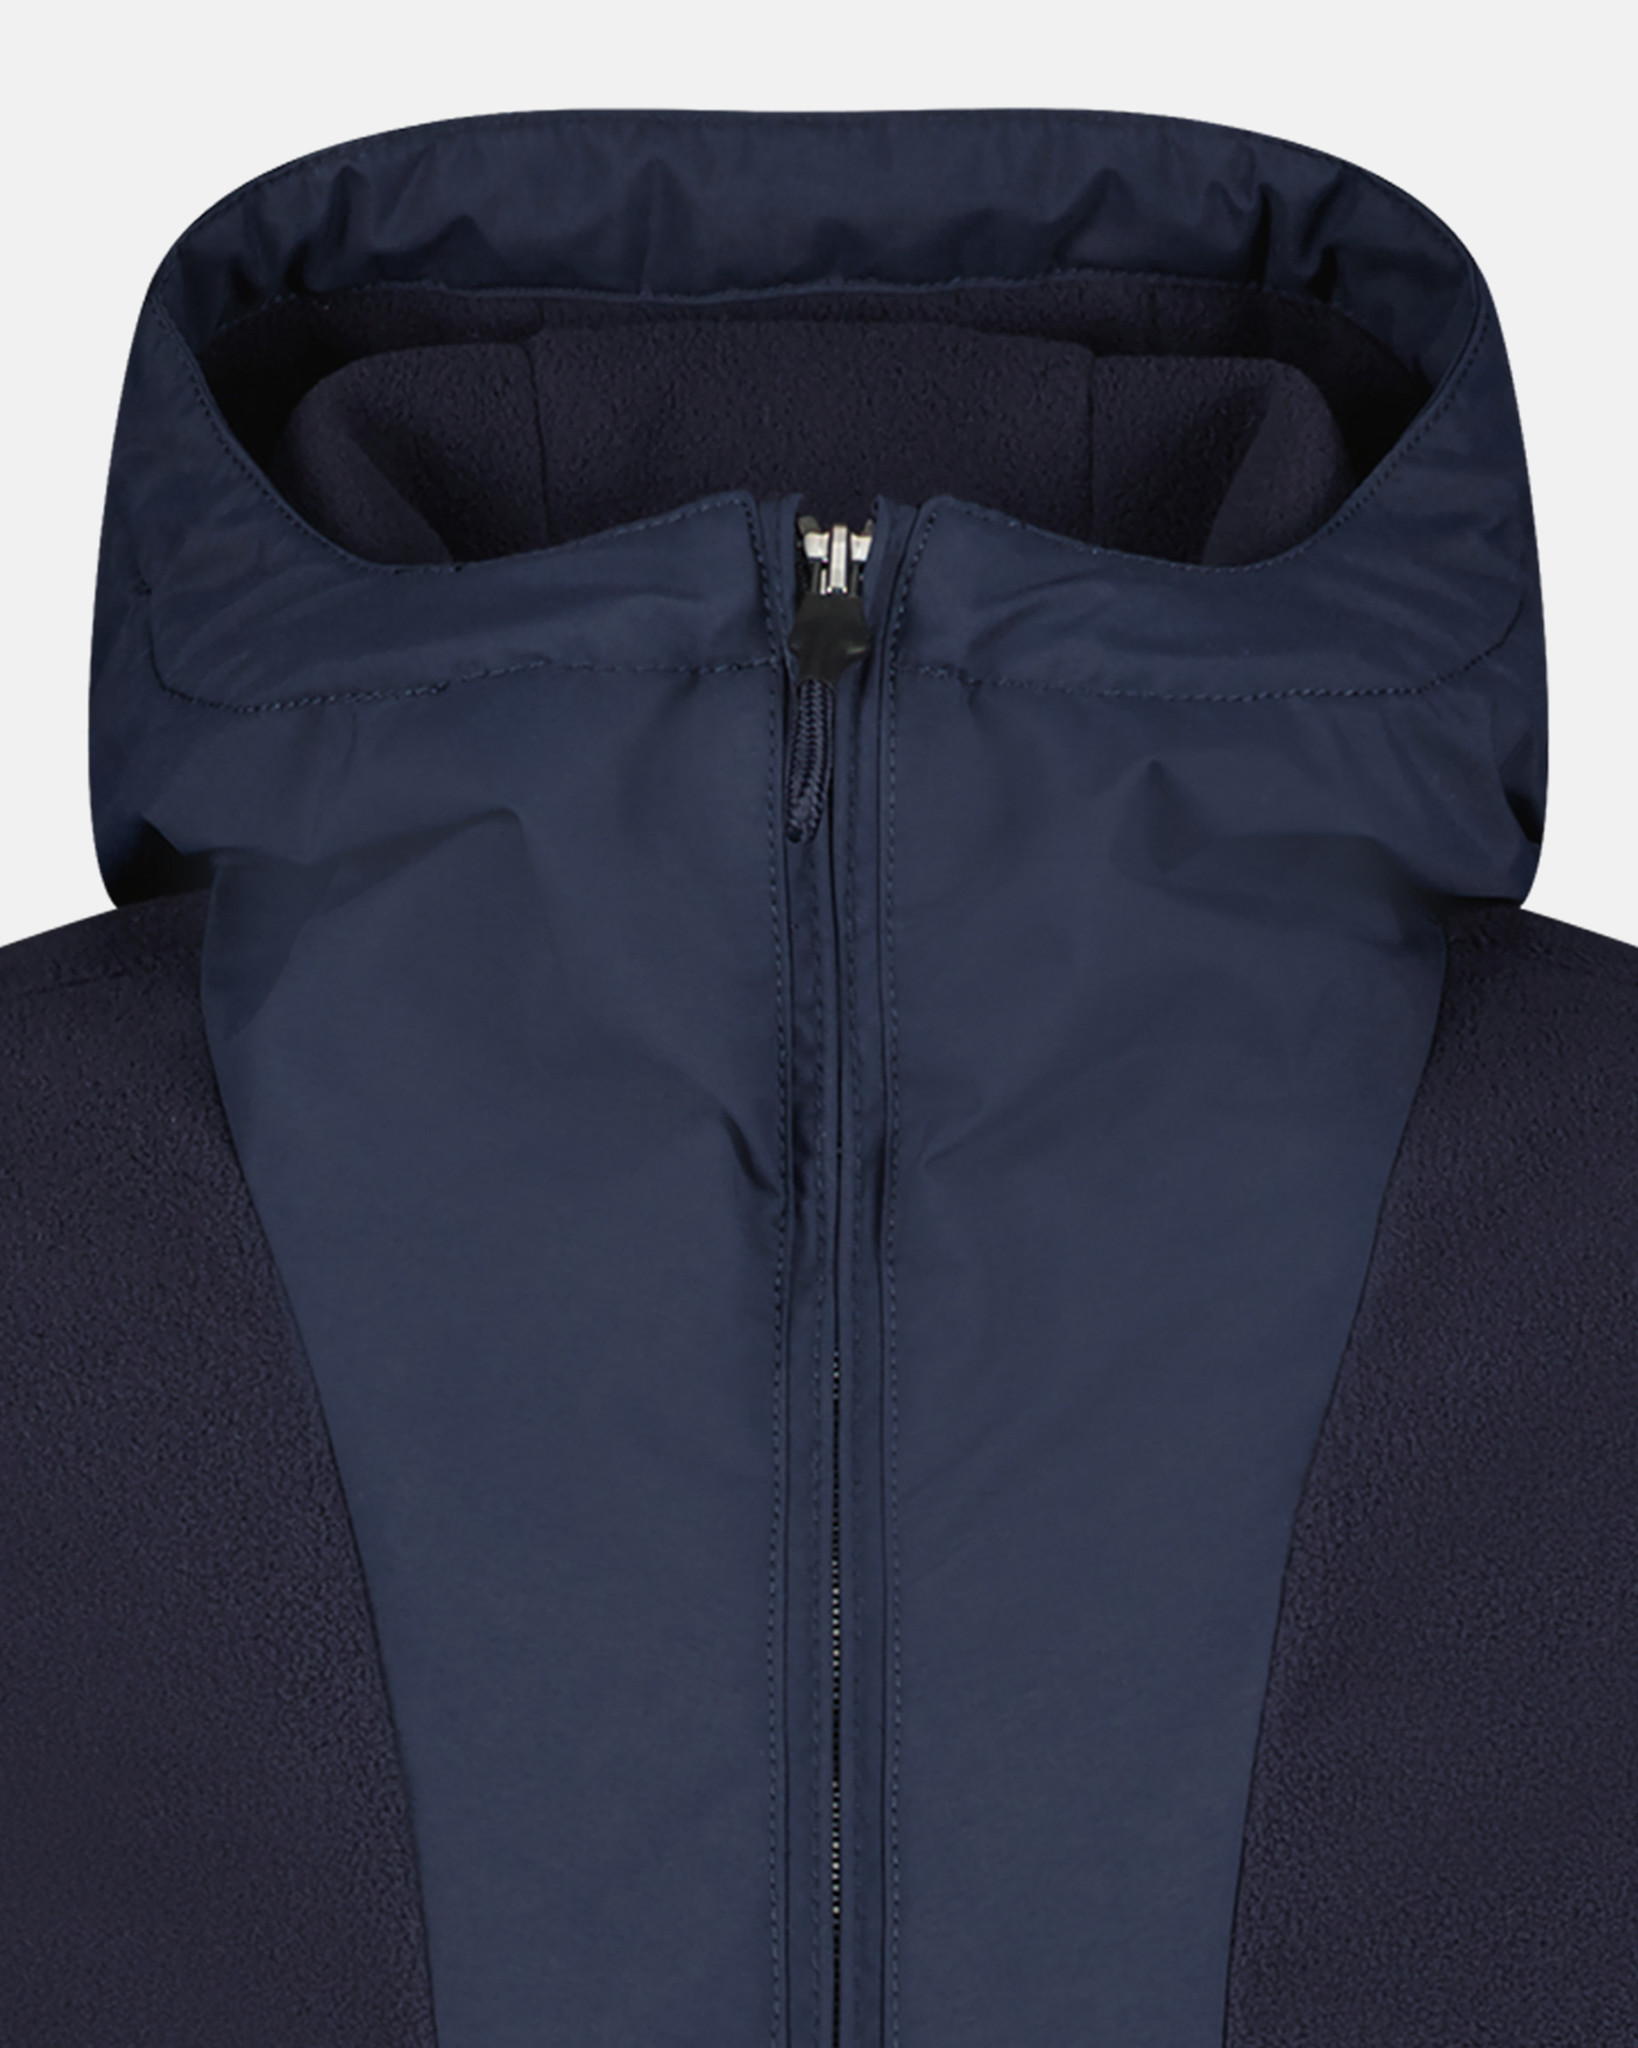 The DWR coated Vancouver Fleece Pullover Navy